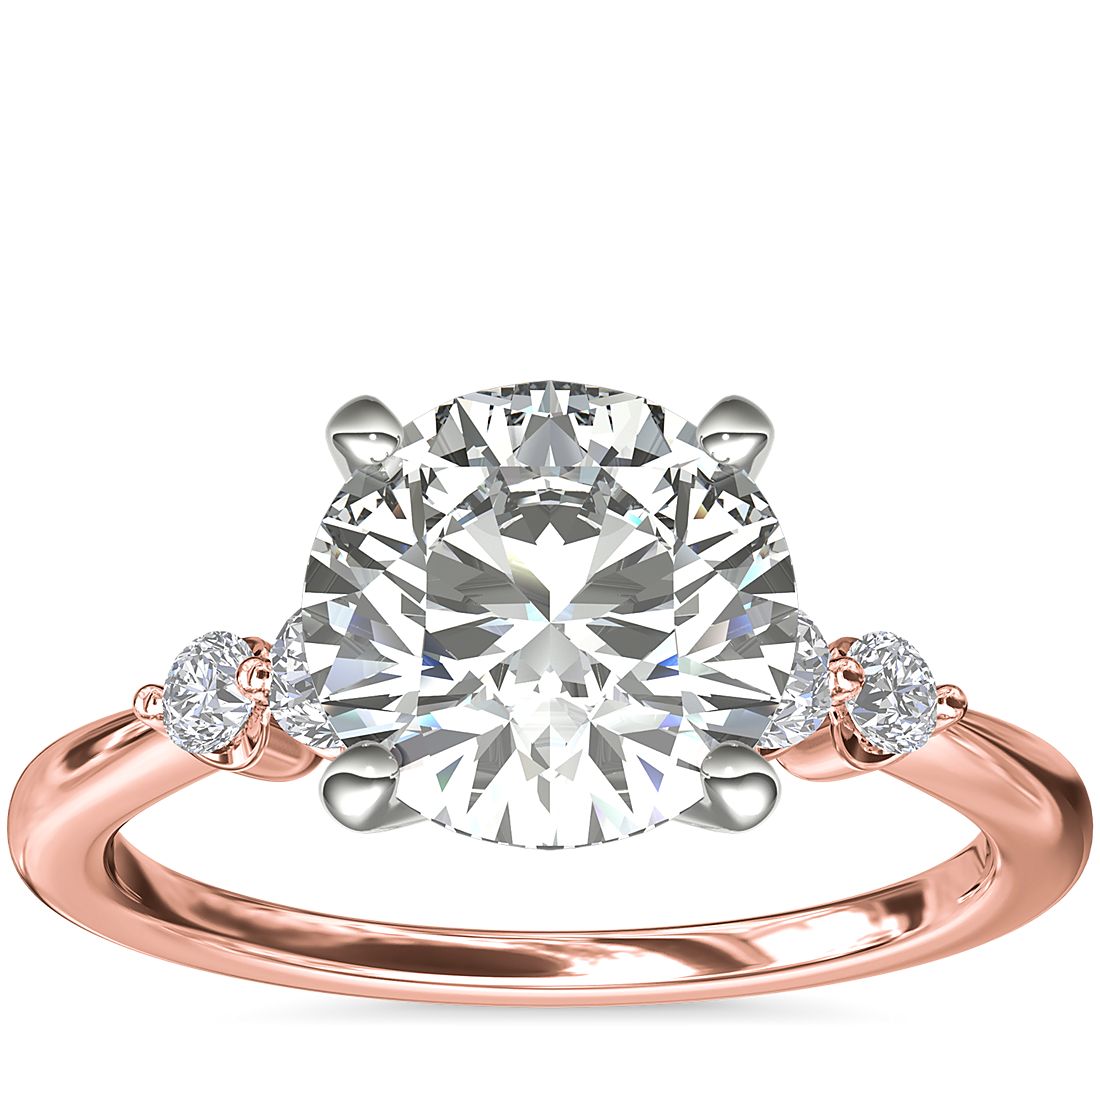 Petite Double Sidestone Diamond Engagement Ring in 14k Rose Gold (1/6 ct. tw.)